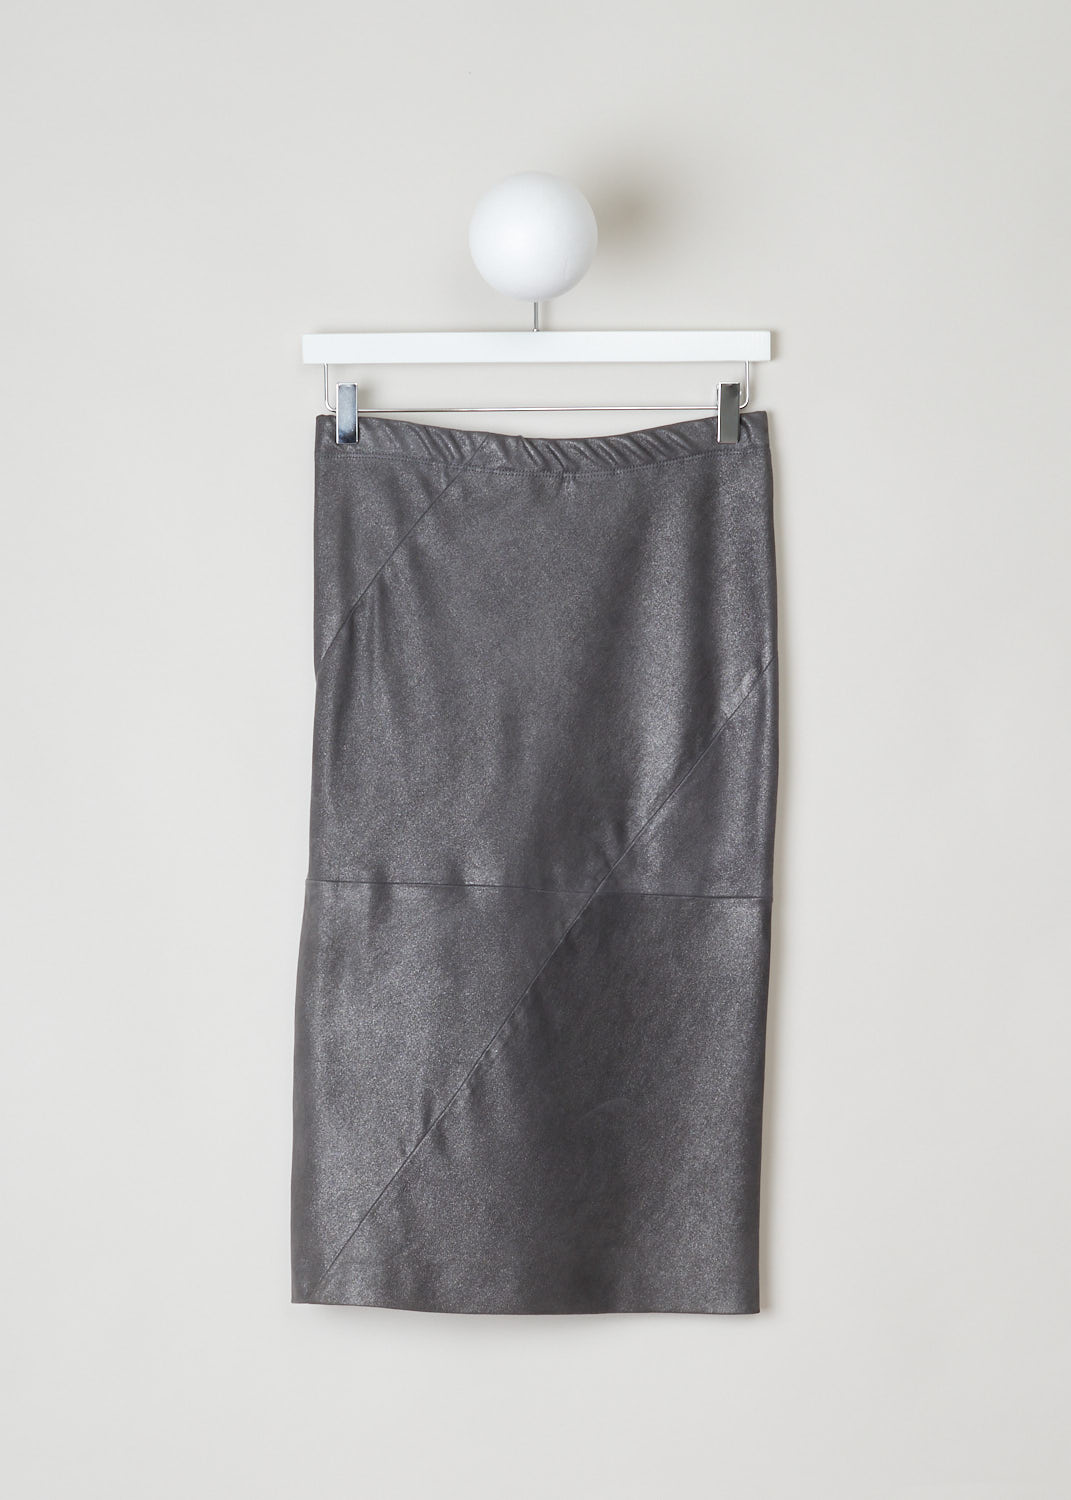 Brunello Cucinelli, Silver grey leather pencil skirt, M0NP0G2738_C079, grey, back, Silver grey leather skirt. This long pencil skirt falls just below the knees. The leather has a stretch and has a light silver sparkle. The leather patches are sewn together diagonally for a unique look. This model has no closure and has an elastic waistband.